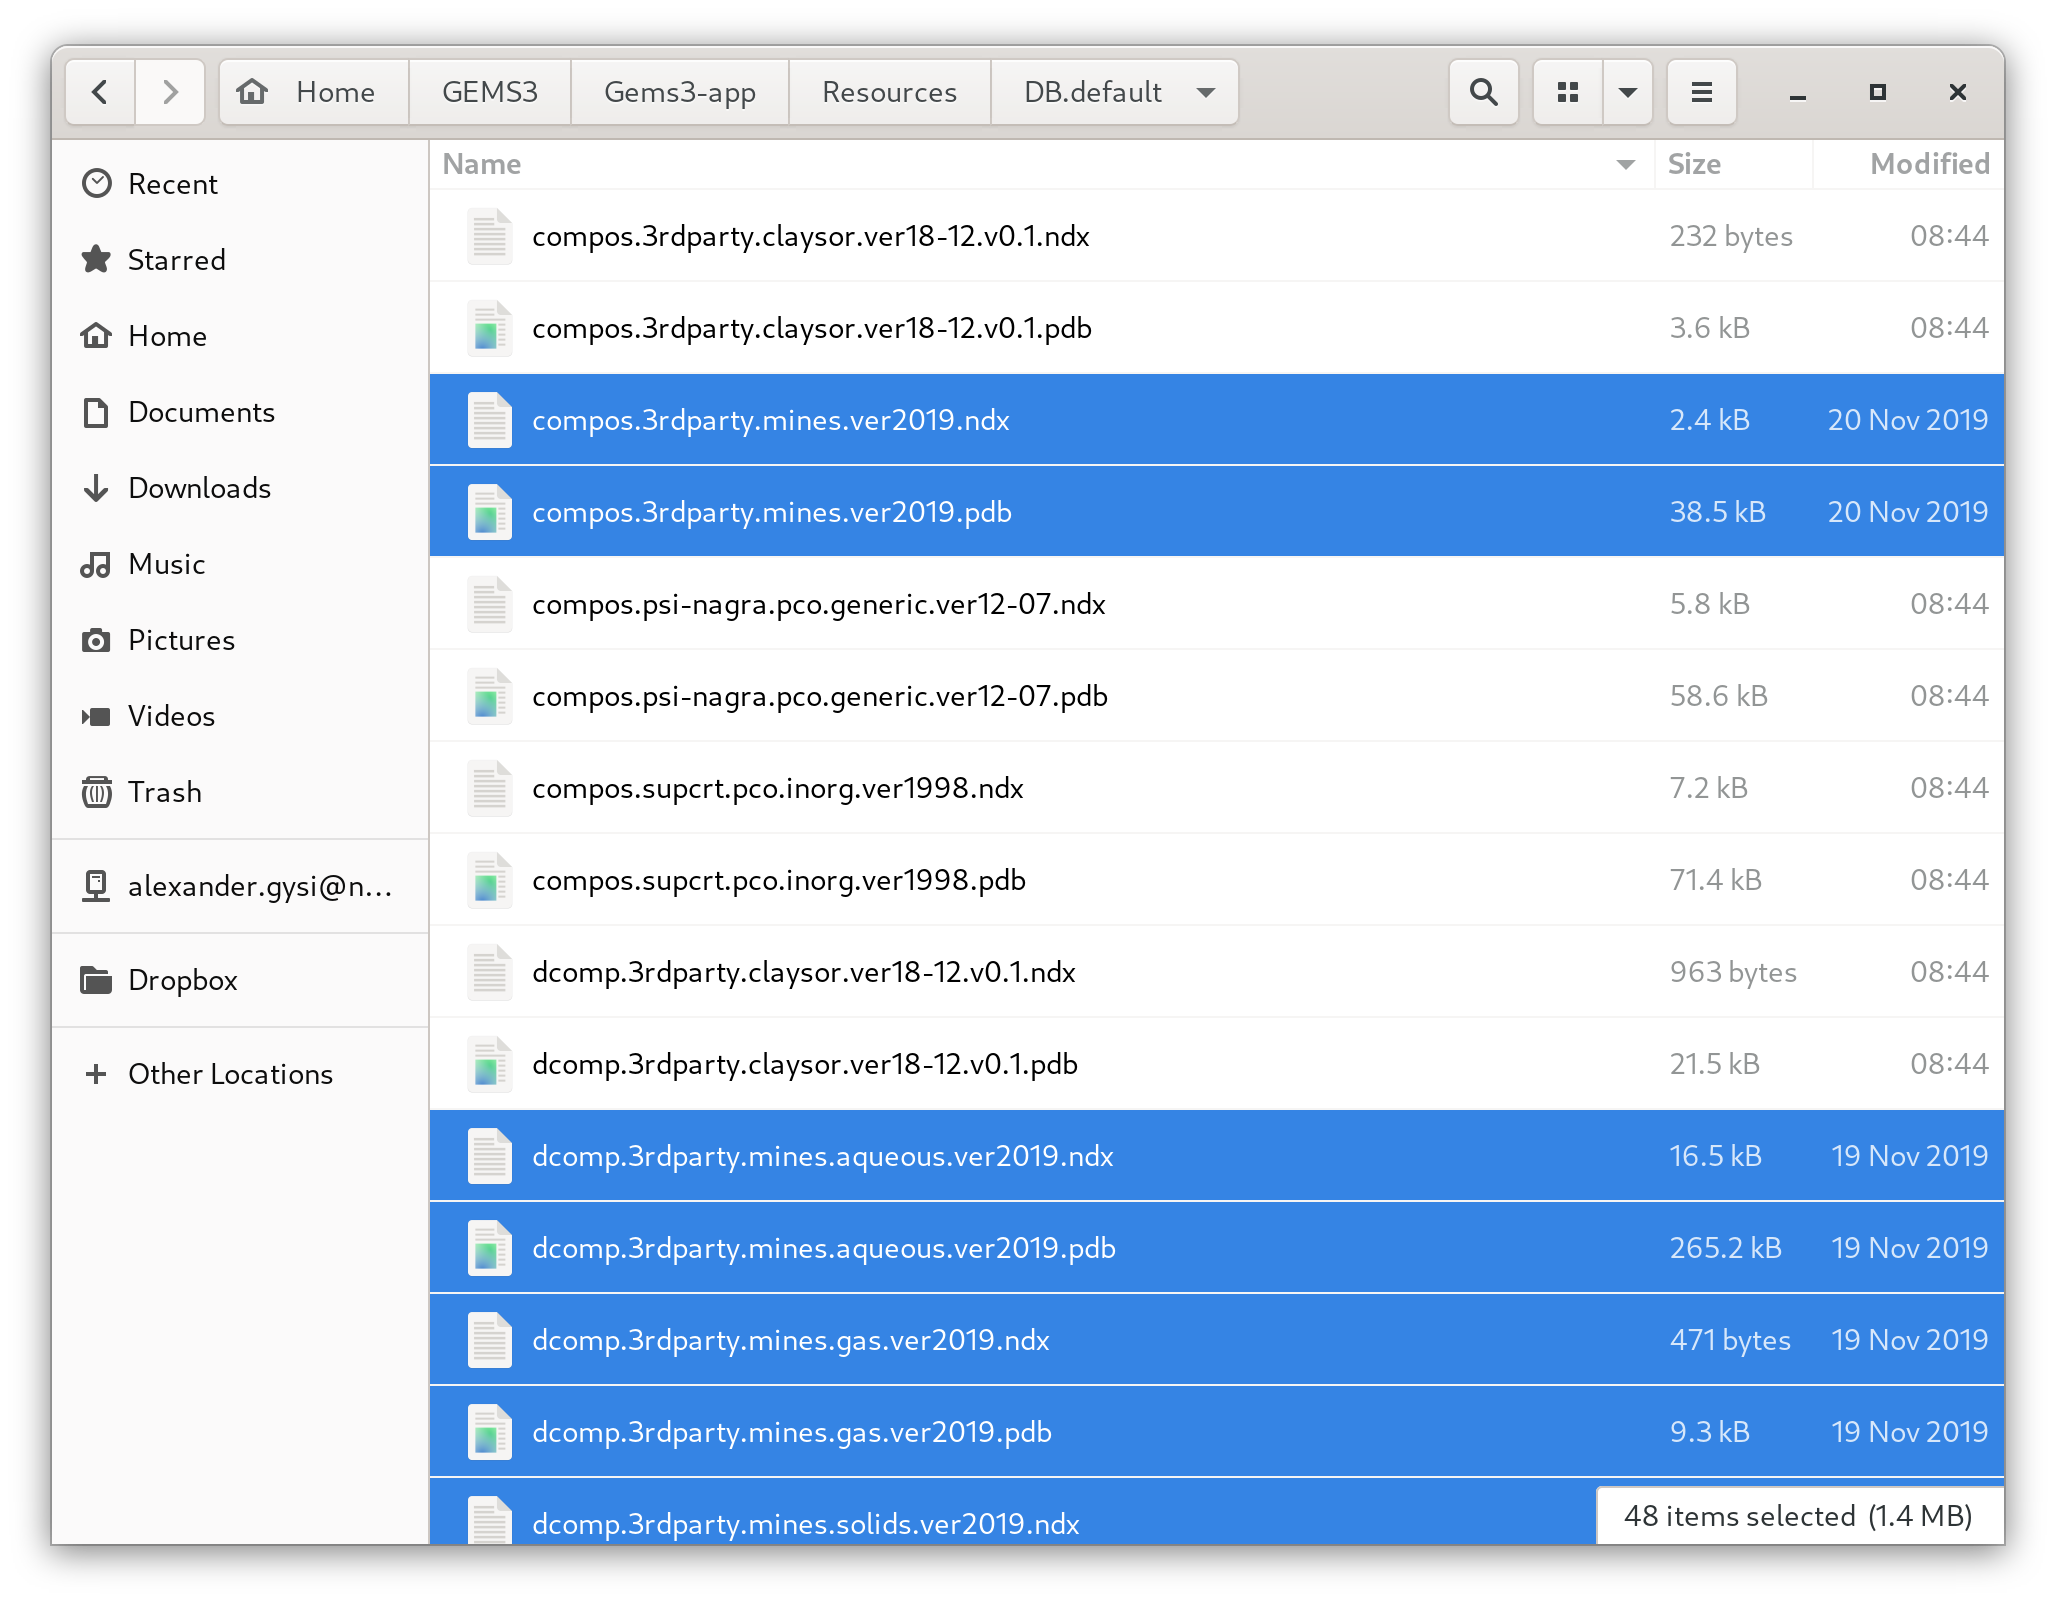 Database files merged with the Gems3-app/Resources/DB.default folder in GEMS.